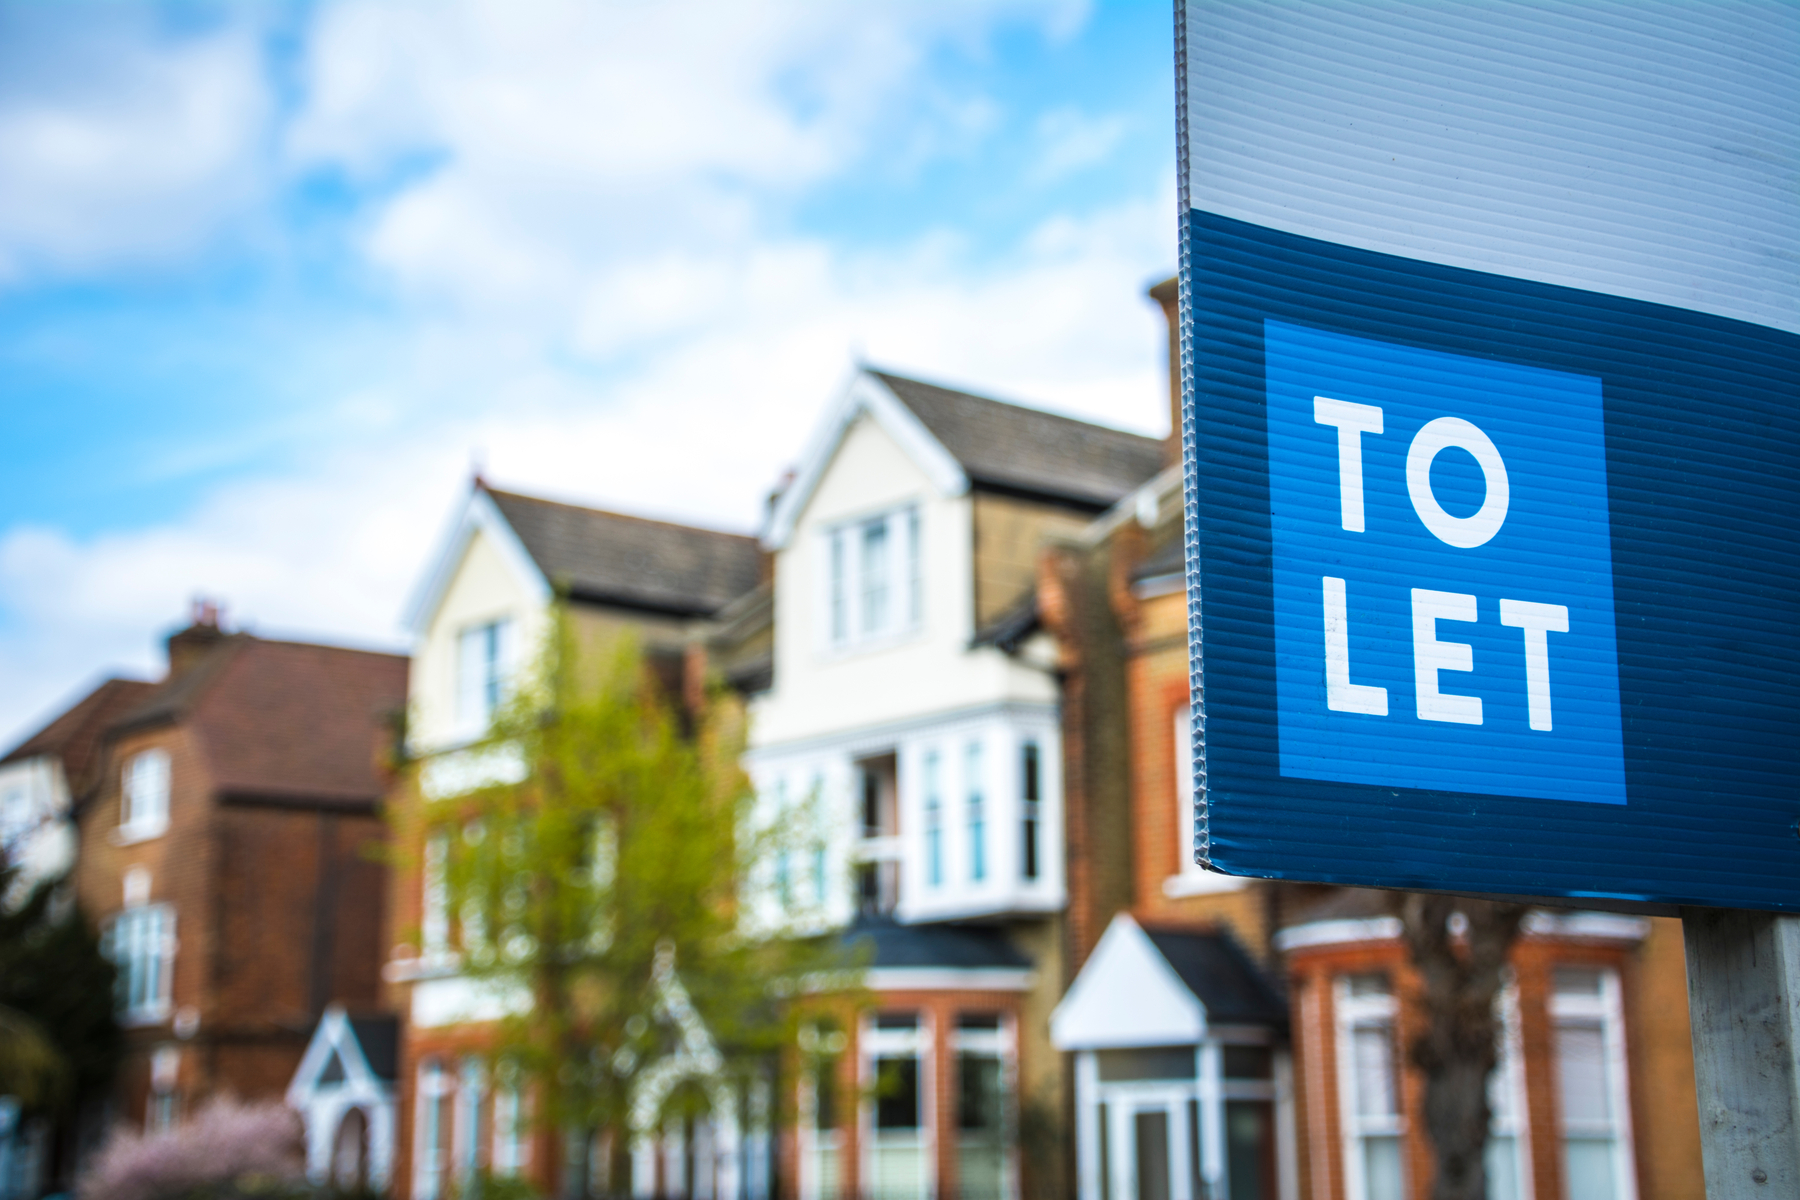 A “to let” sign outside a row of houses